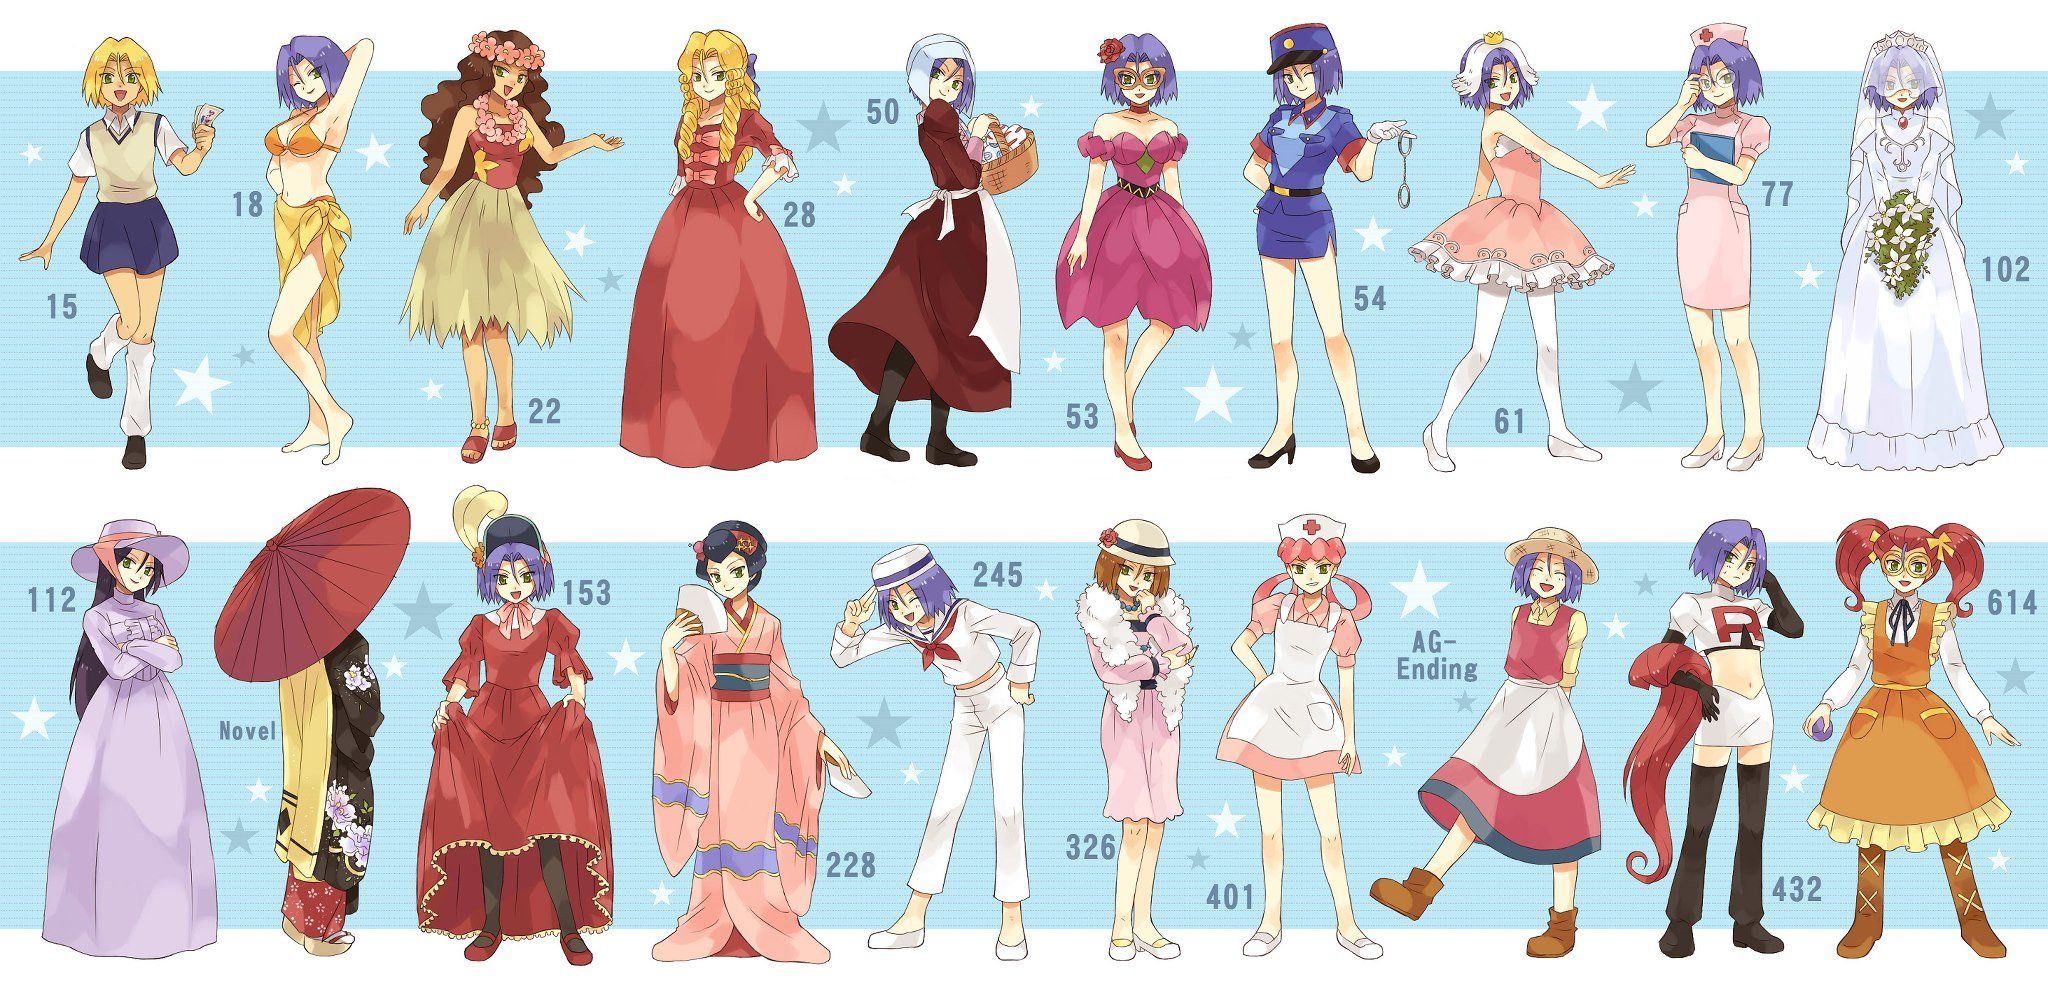 22 Pokémon Characters Reimagined As Girls